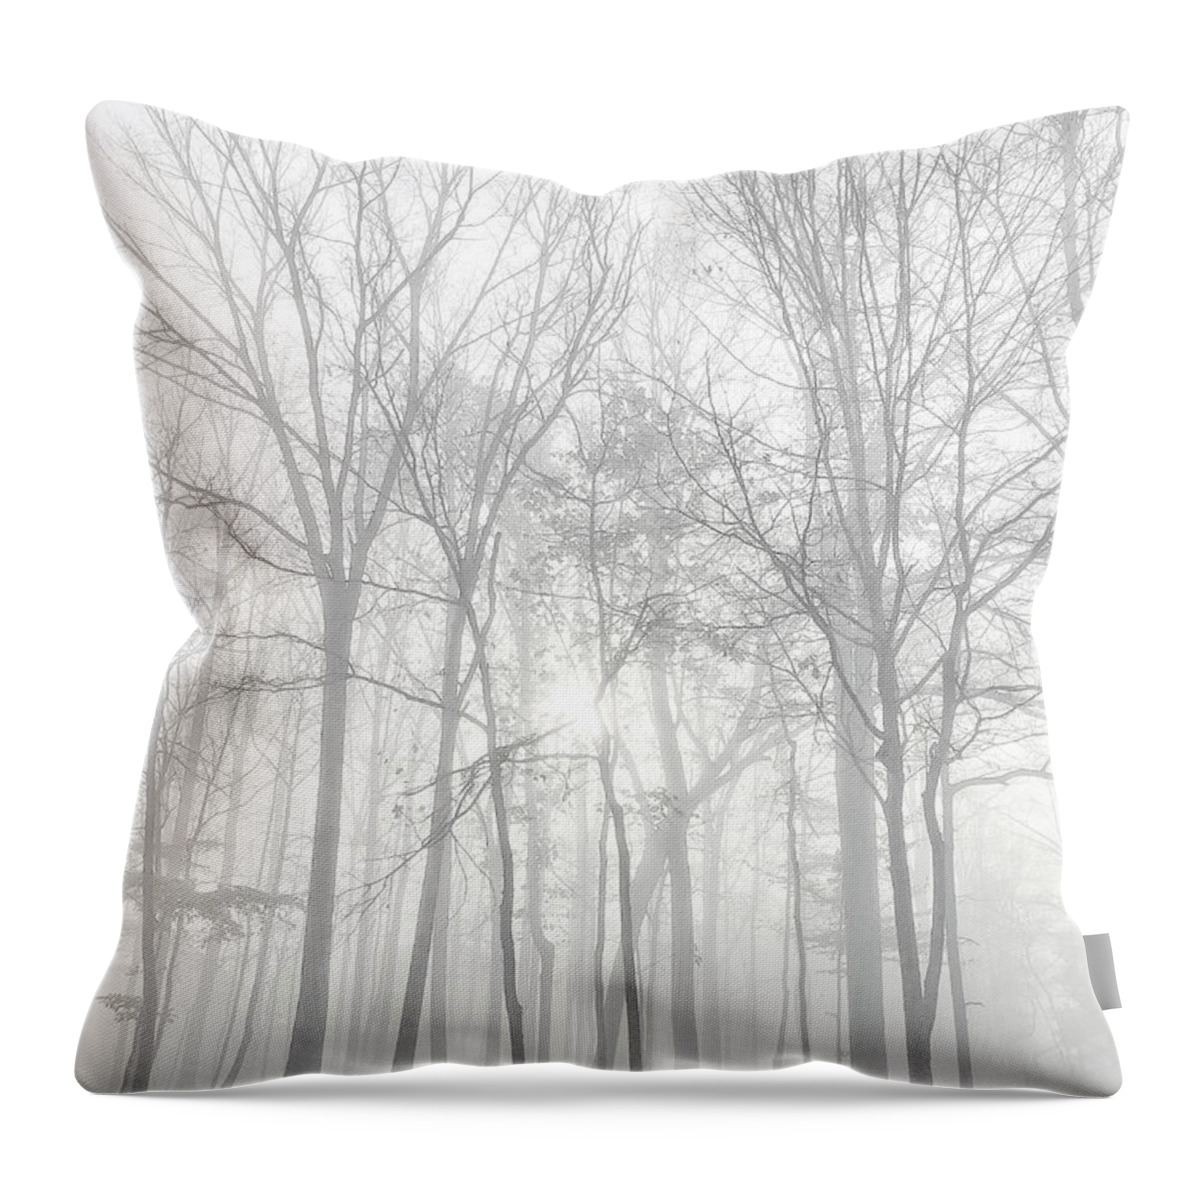 Fog Throw Pillow featuring the photograph Foggy Trees by Karen Smale